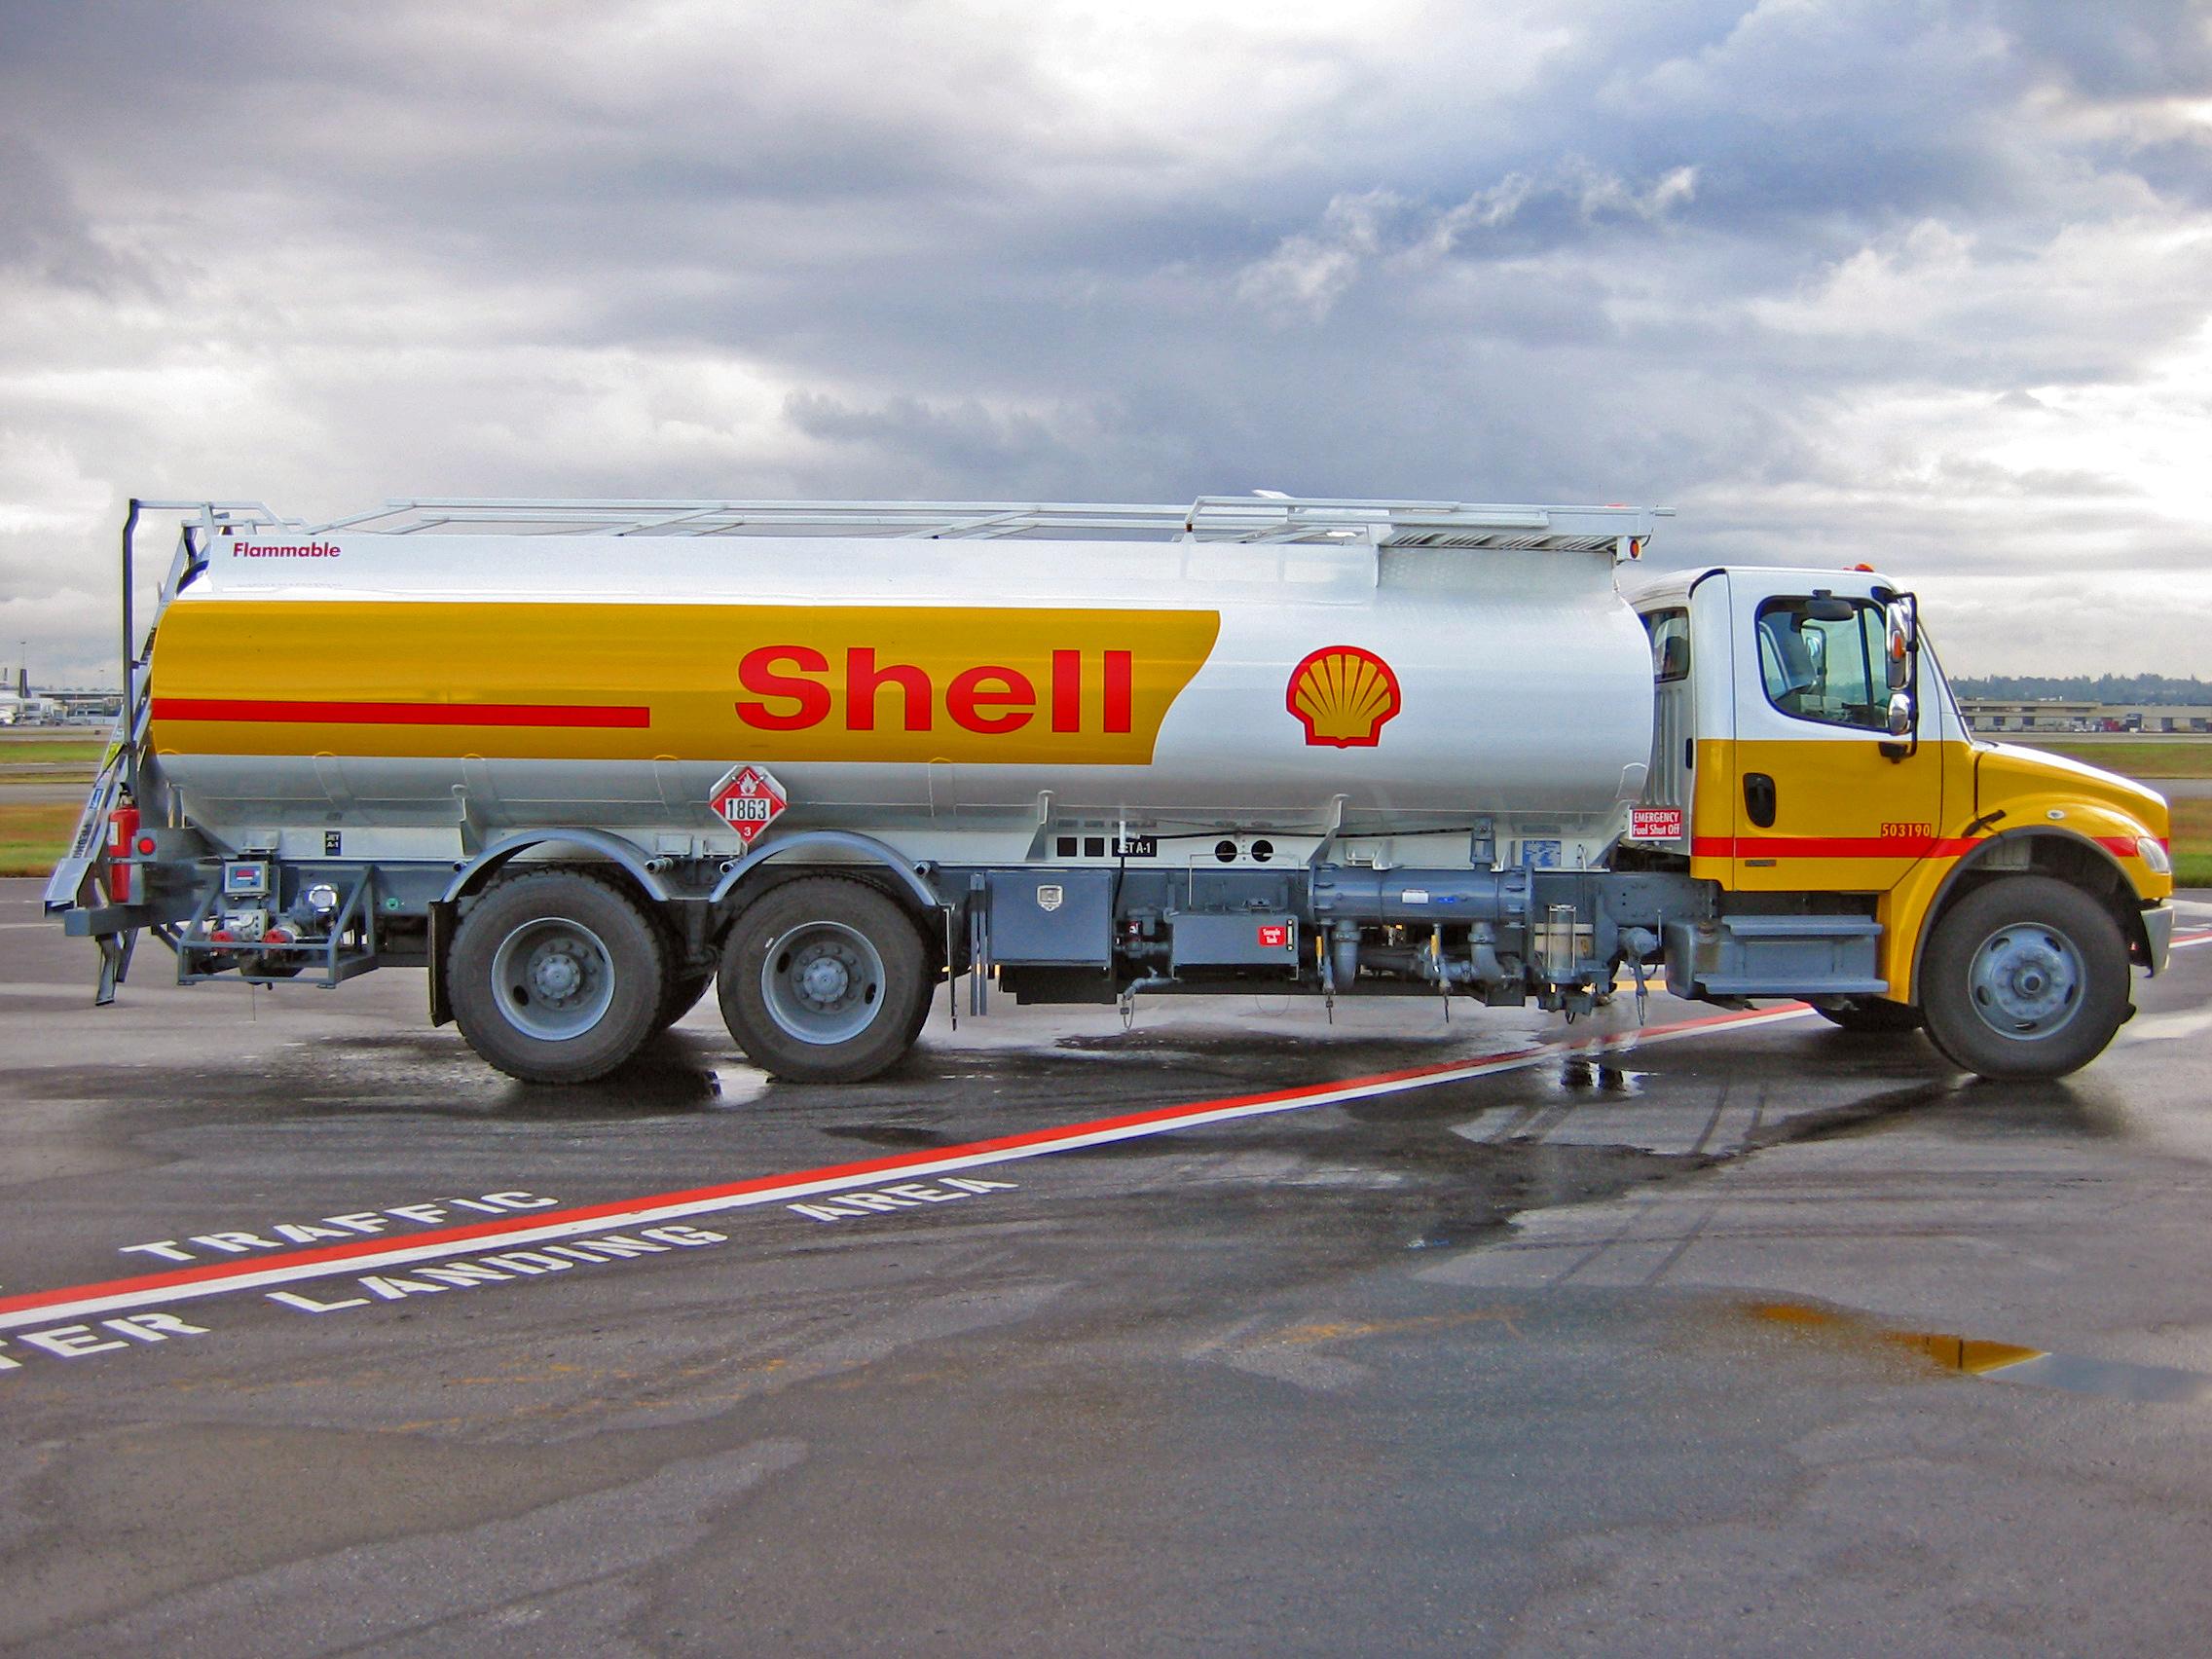 Amazing Shell Vip Jet Tanker Pictures & Backgrounds